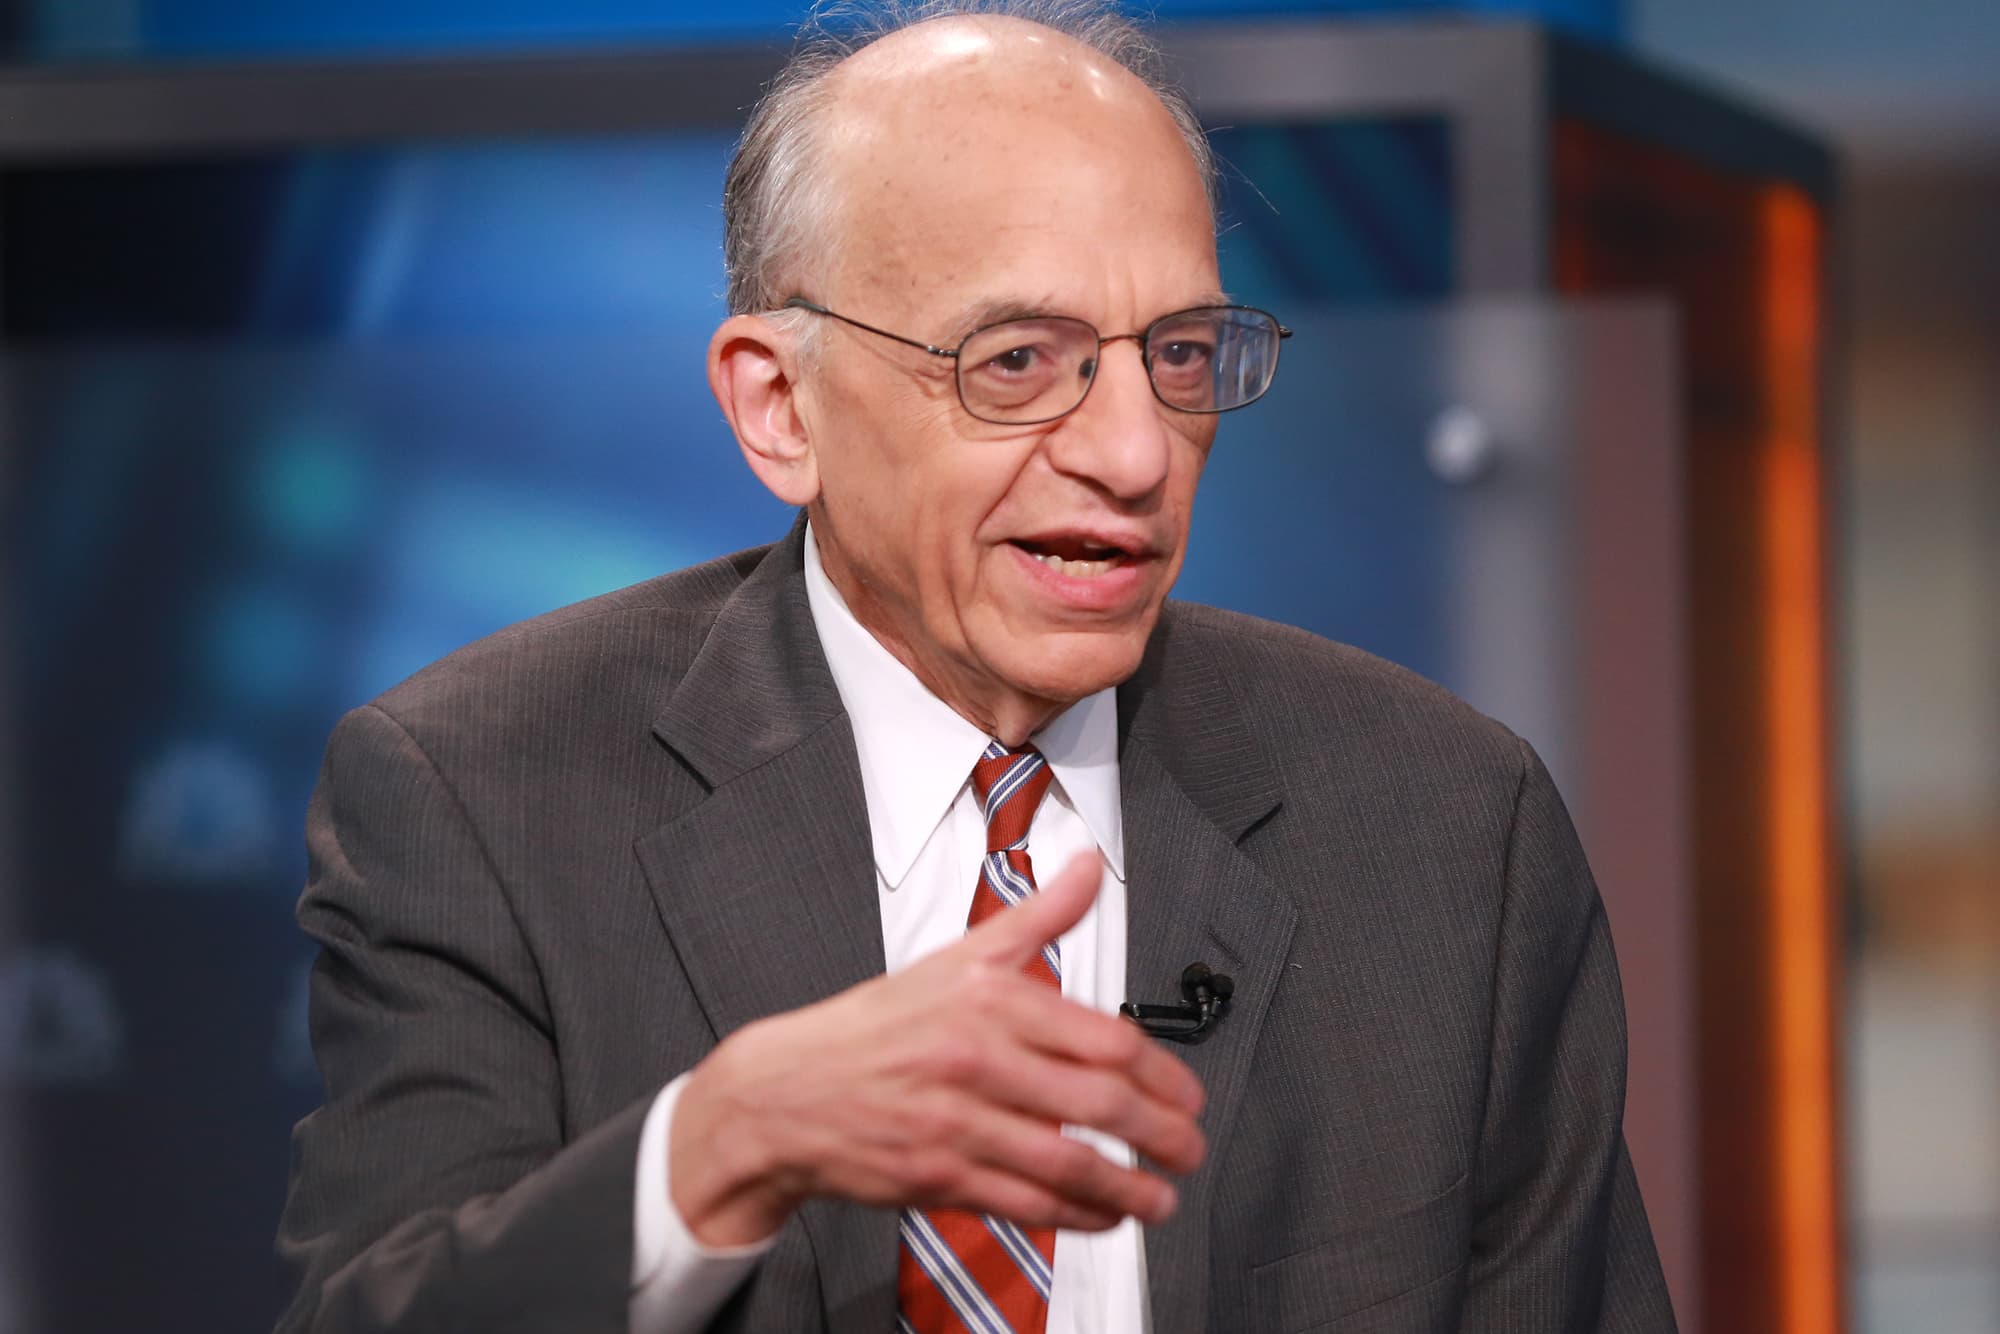 If the Fed doesn't cut rates, it will be 'tougher sledding' for the market this year, says Jeremy Siegel